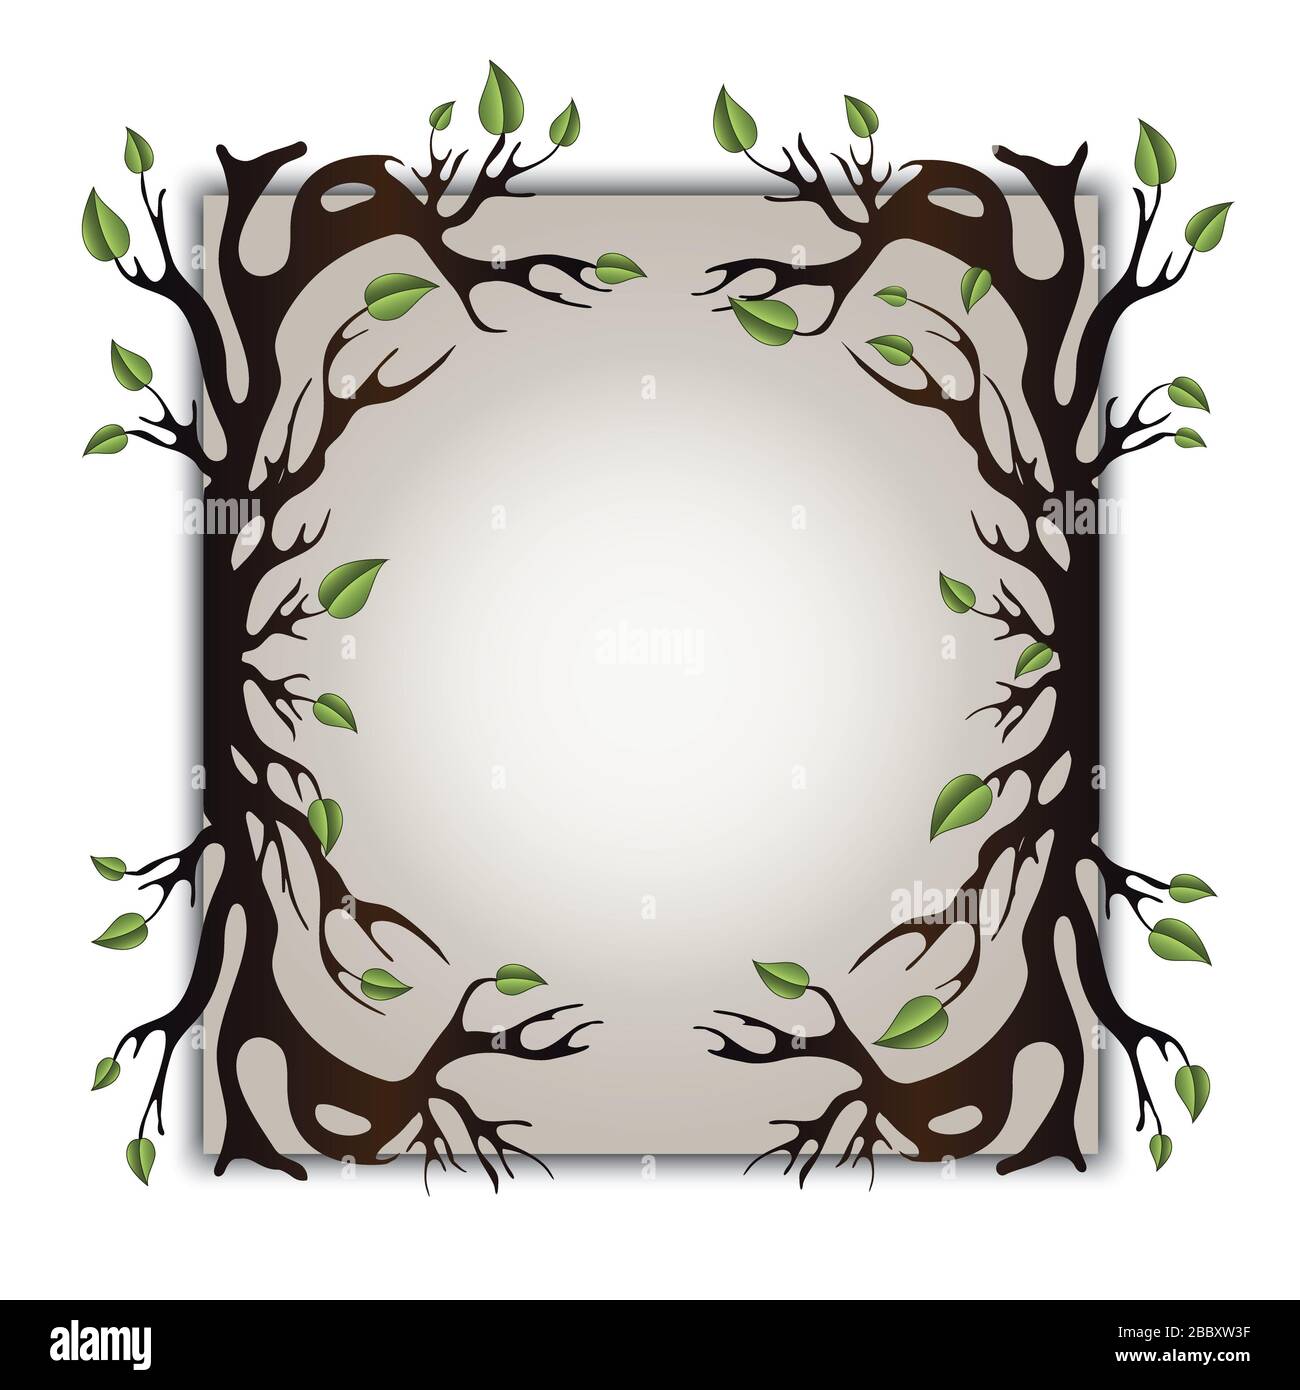 Digital Green Vines Clip Art. Green Laurel Wreath and Leaves Clipart. Vine  Frames and Borders for Wedding Dainty Olive Green Vines 